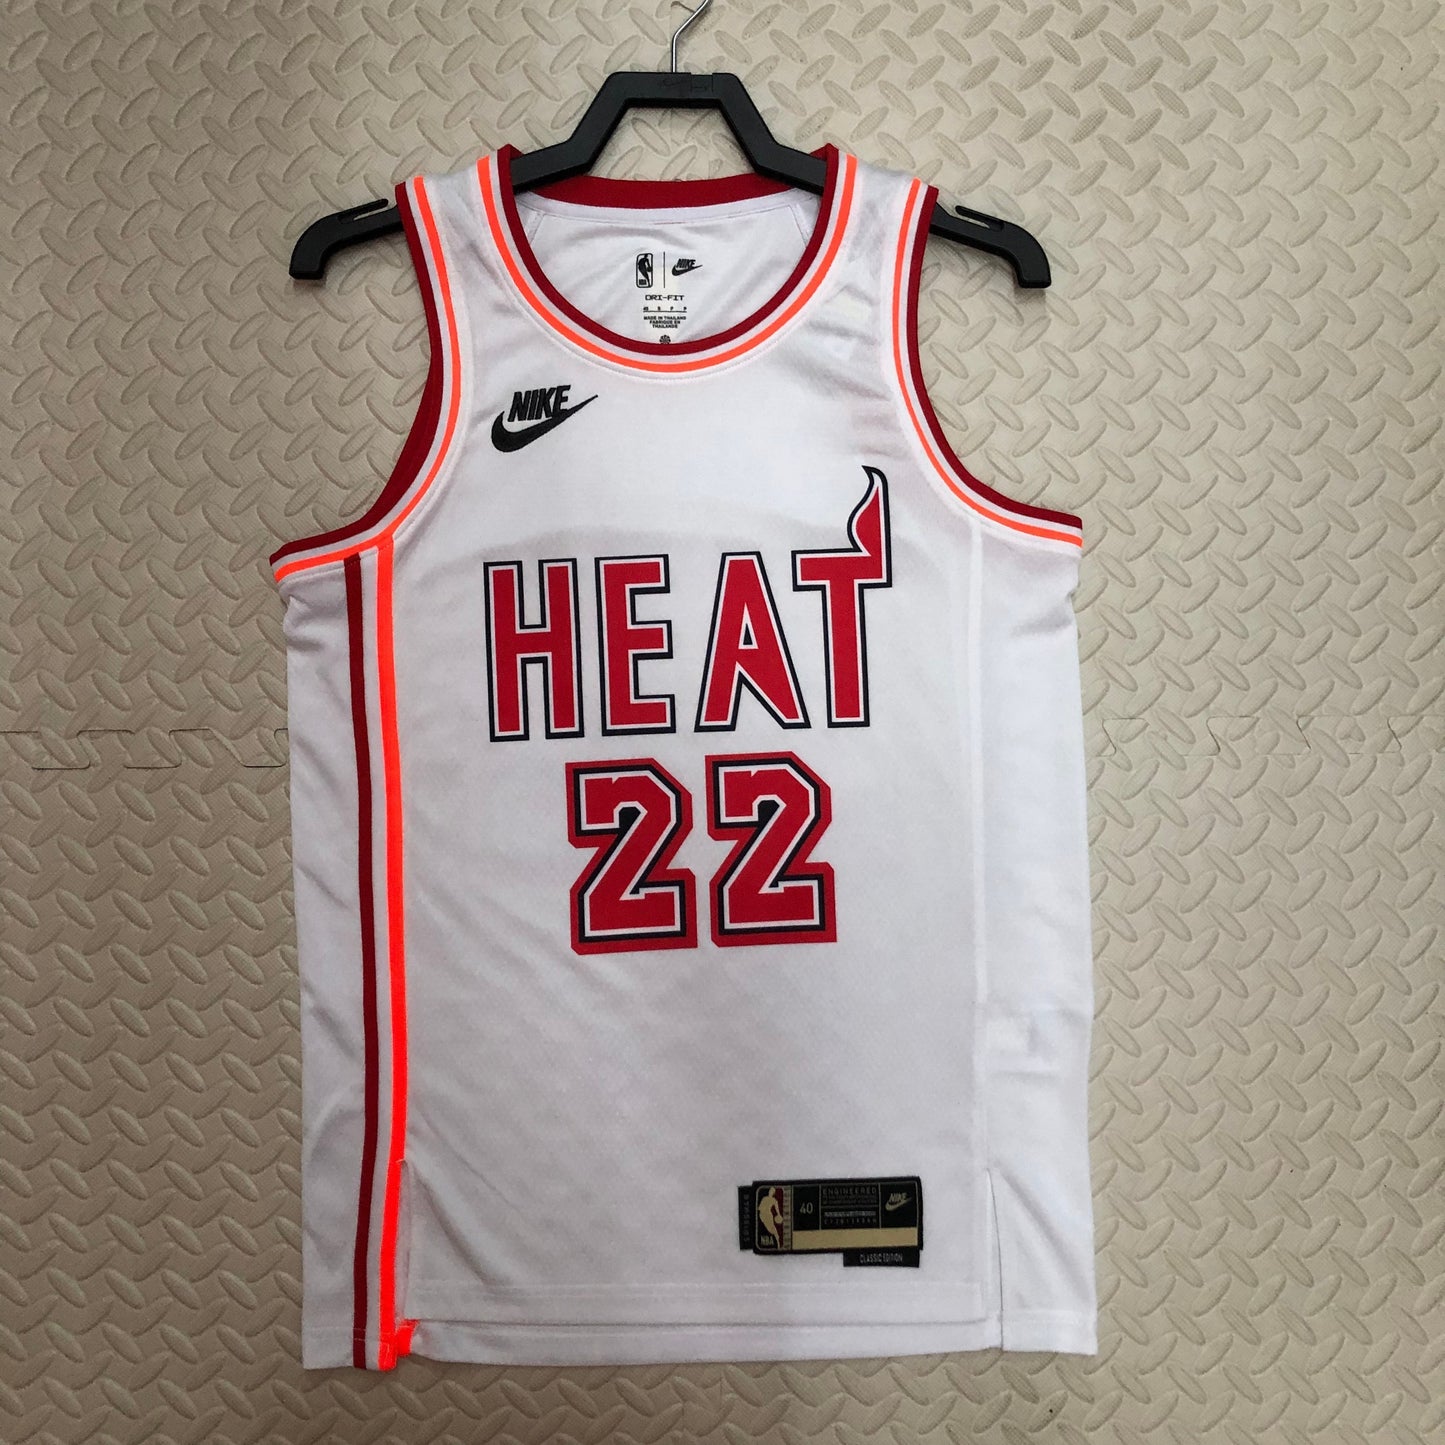 All Mashup Jerseys – Tagged jimmy-butler – Miami HEAT Store